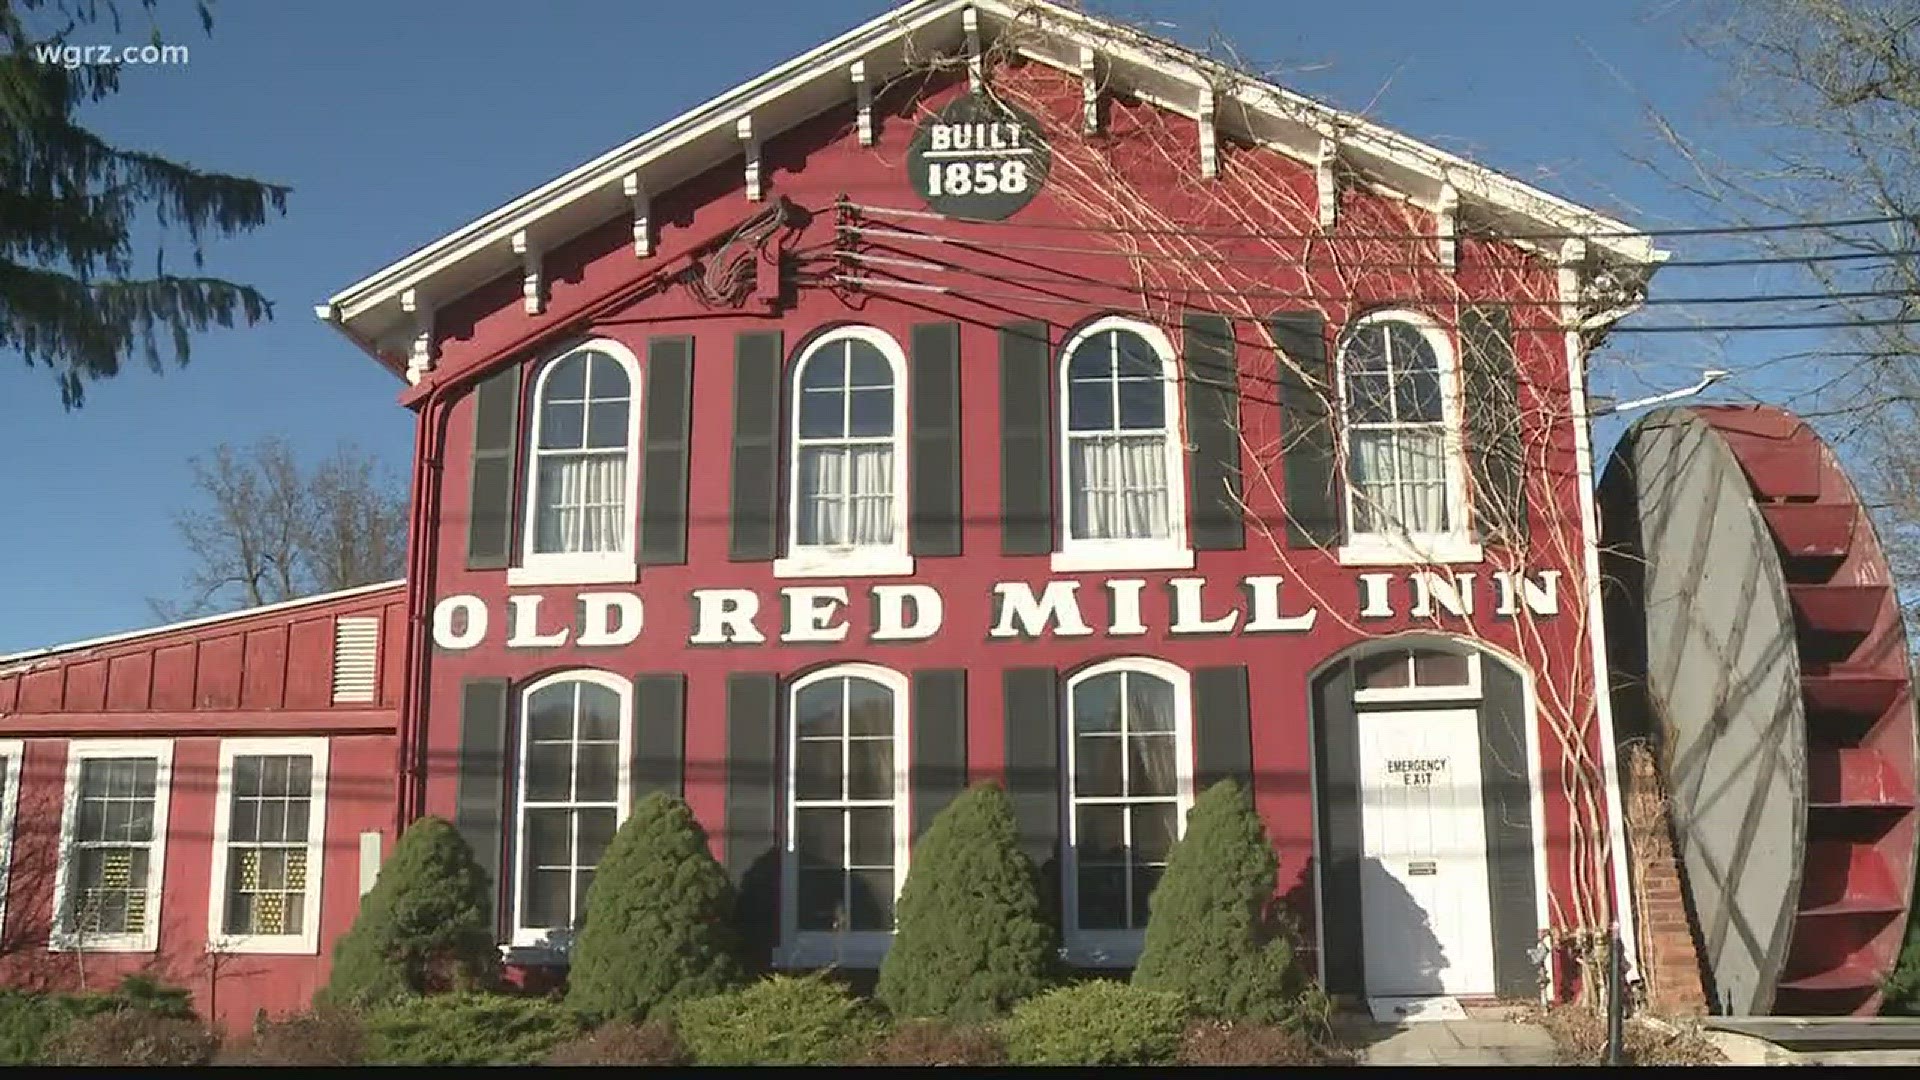 Bar Bill Owner Buys Old Red Mill Inn